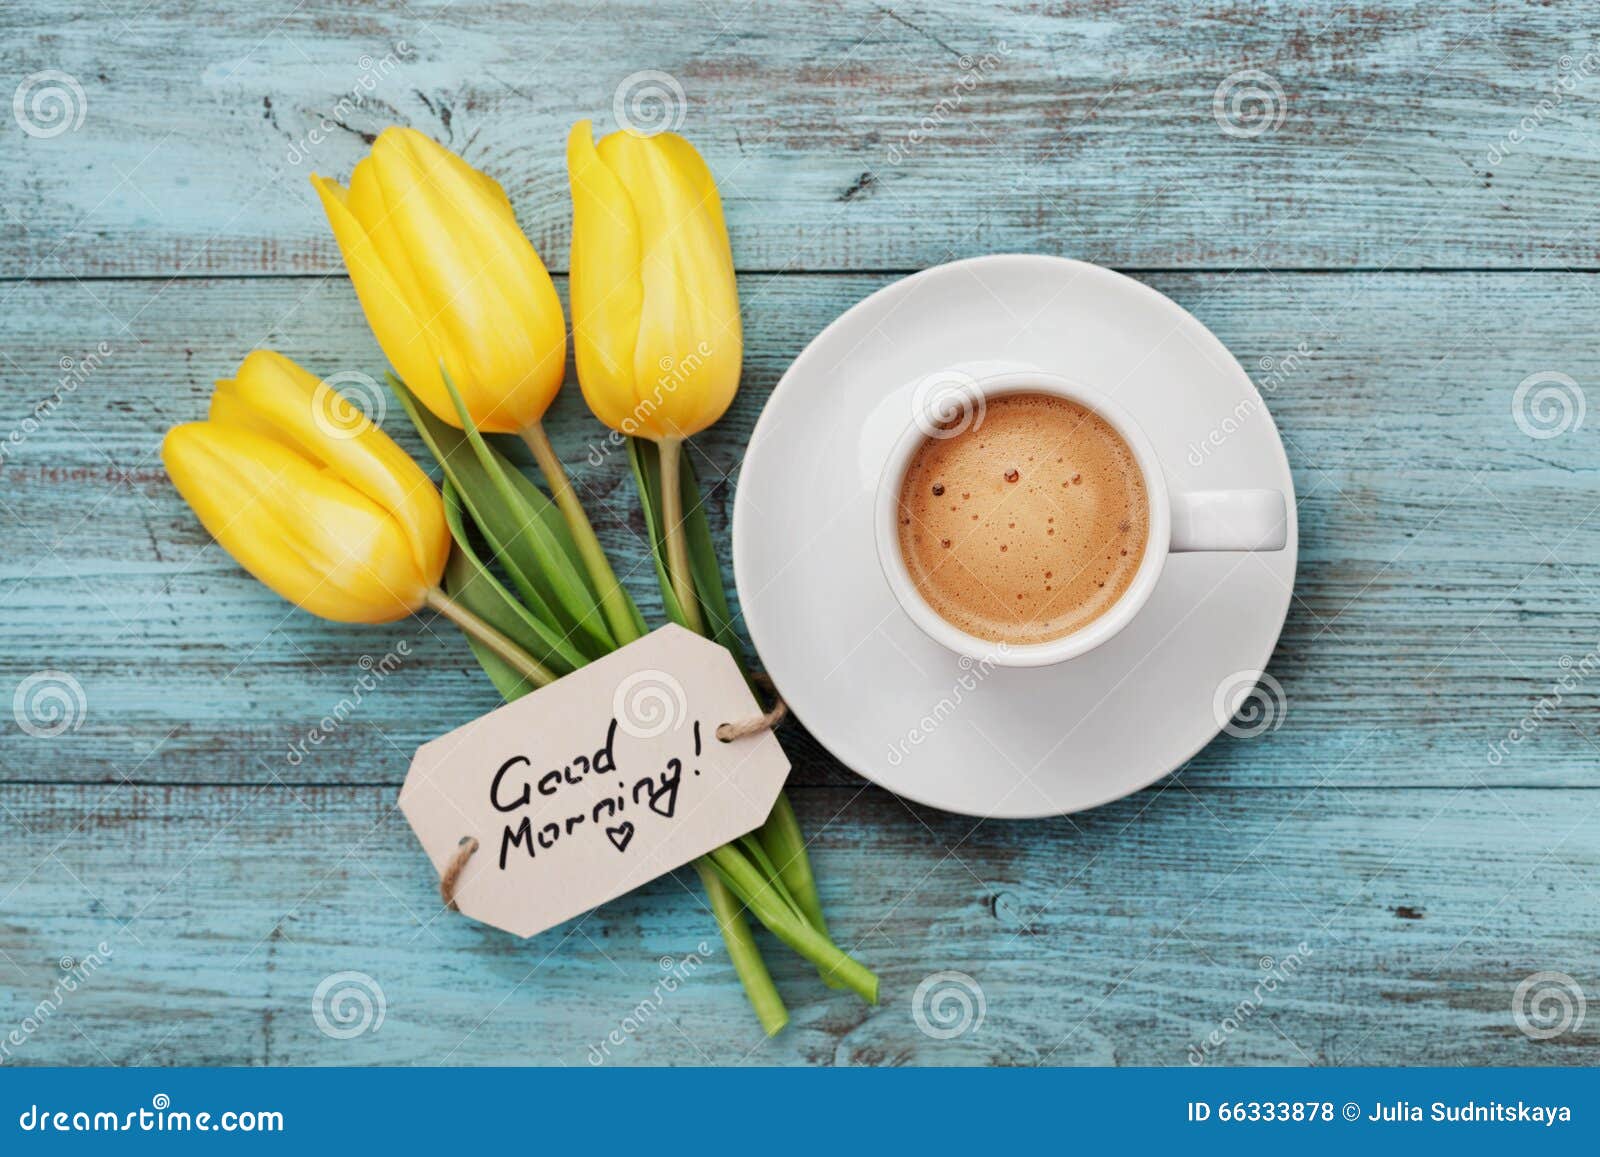 coffee mug with yellow tulip flowers and notes good morning on blue rustic table from above